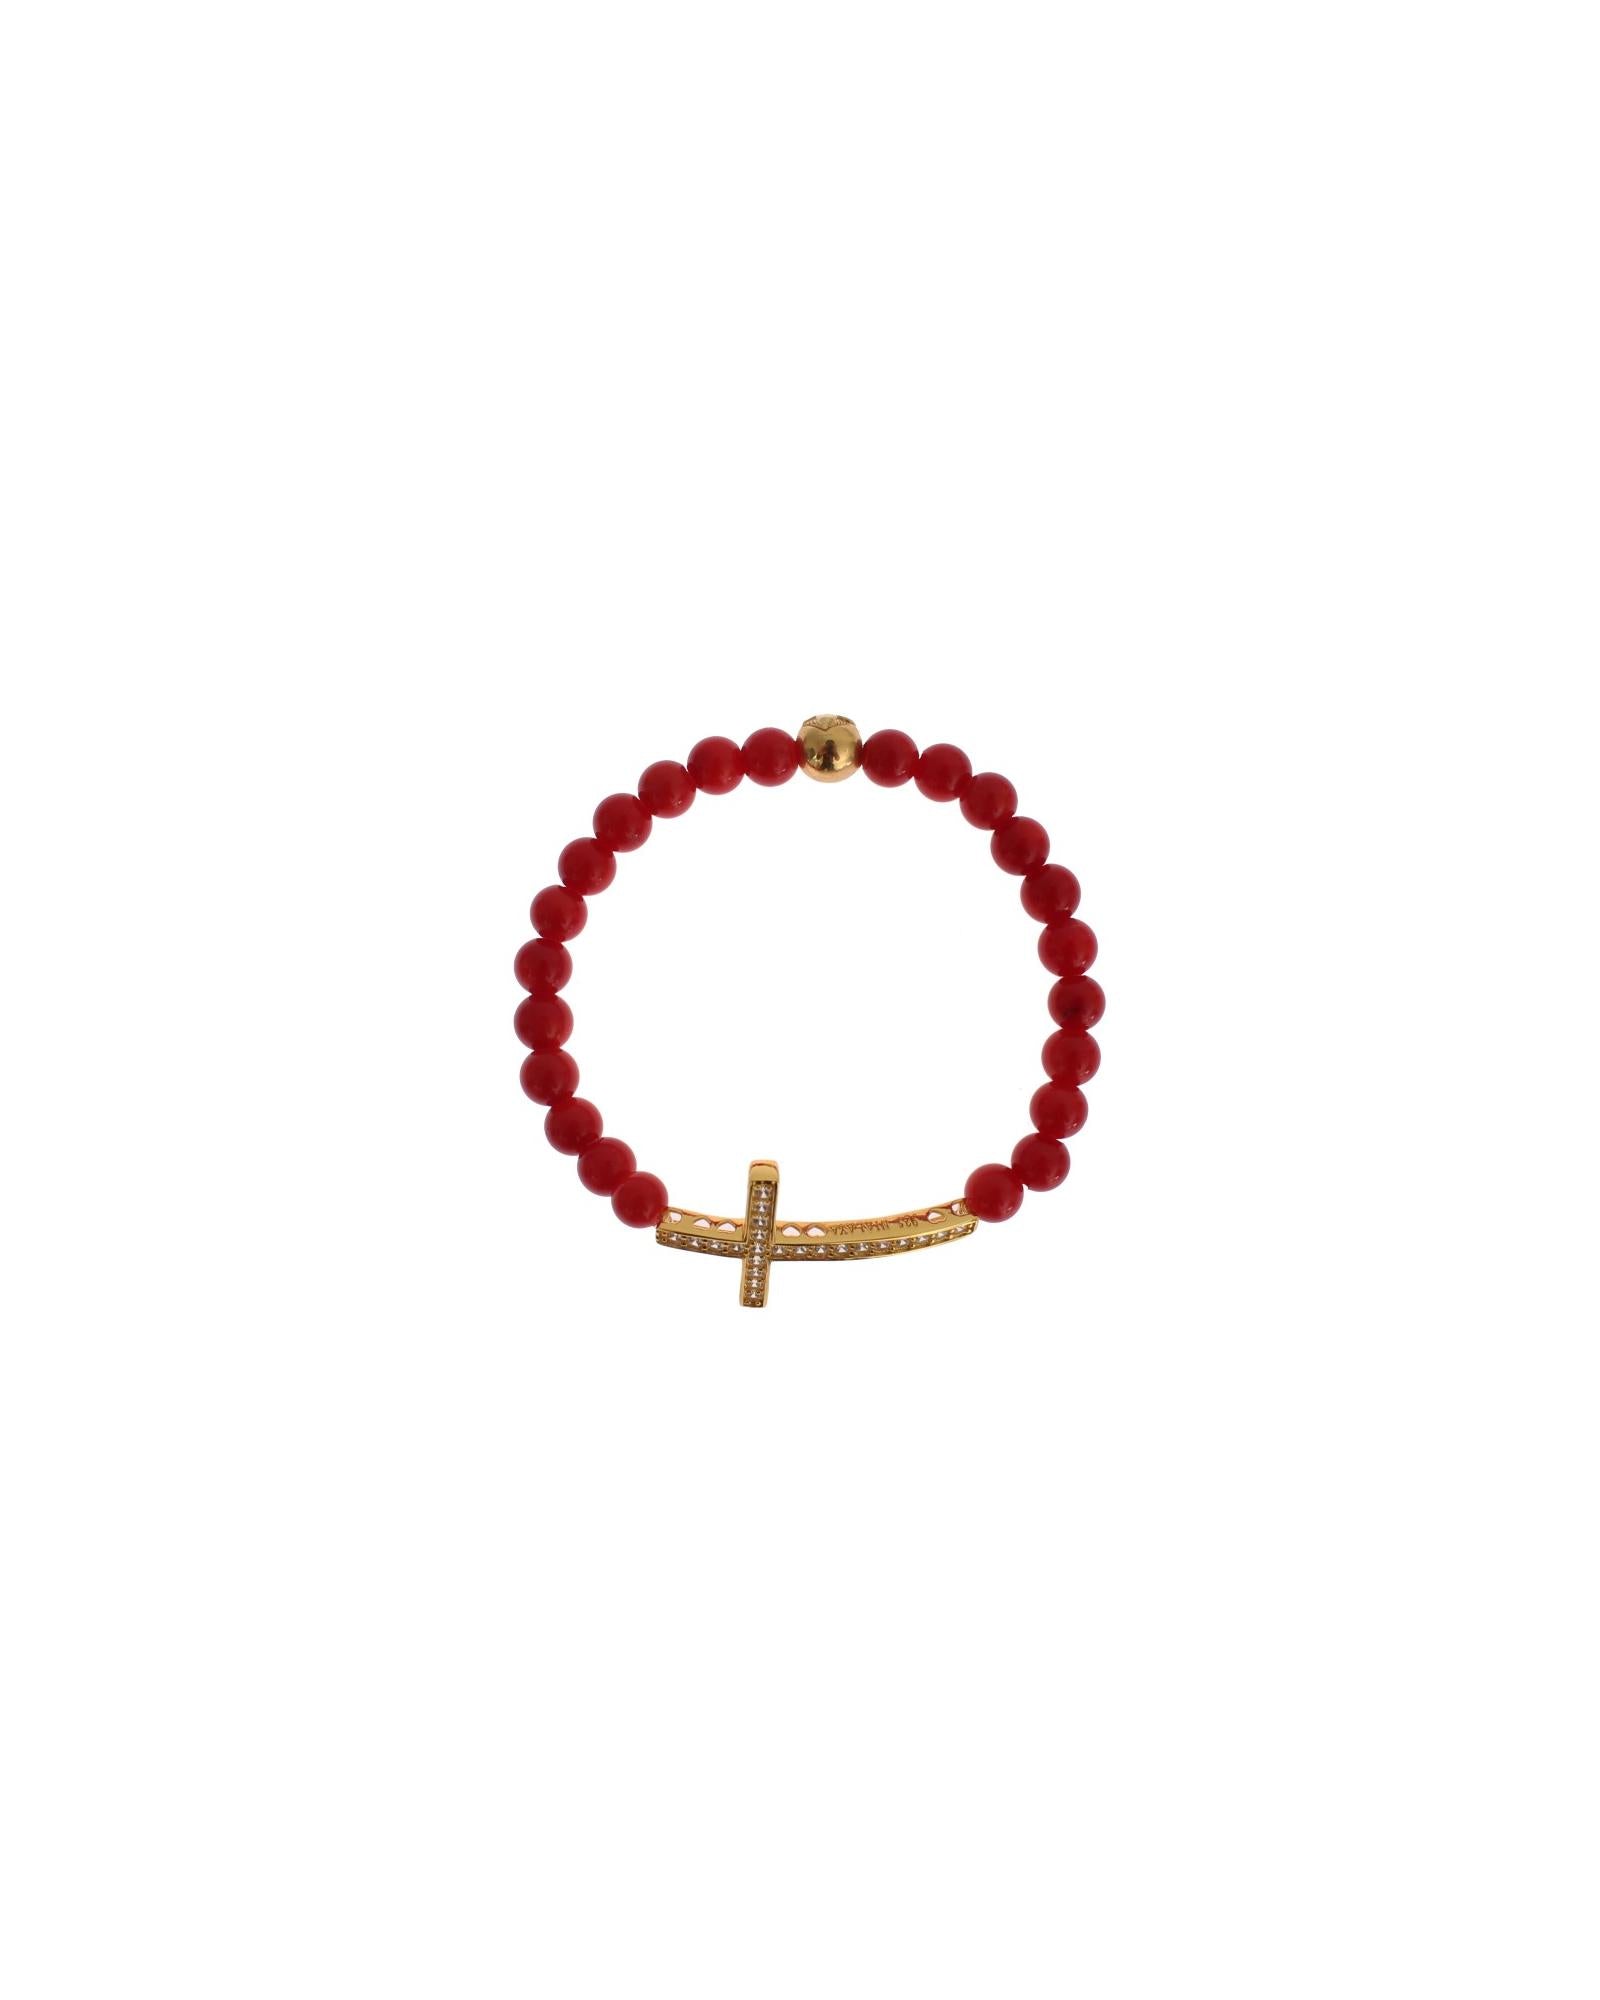 Authentic NIALAYA Gold Plated Silver Bracelet with Red Coral Beads and CZ Diamond Cross M Women